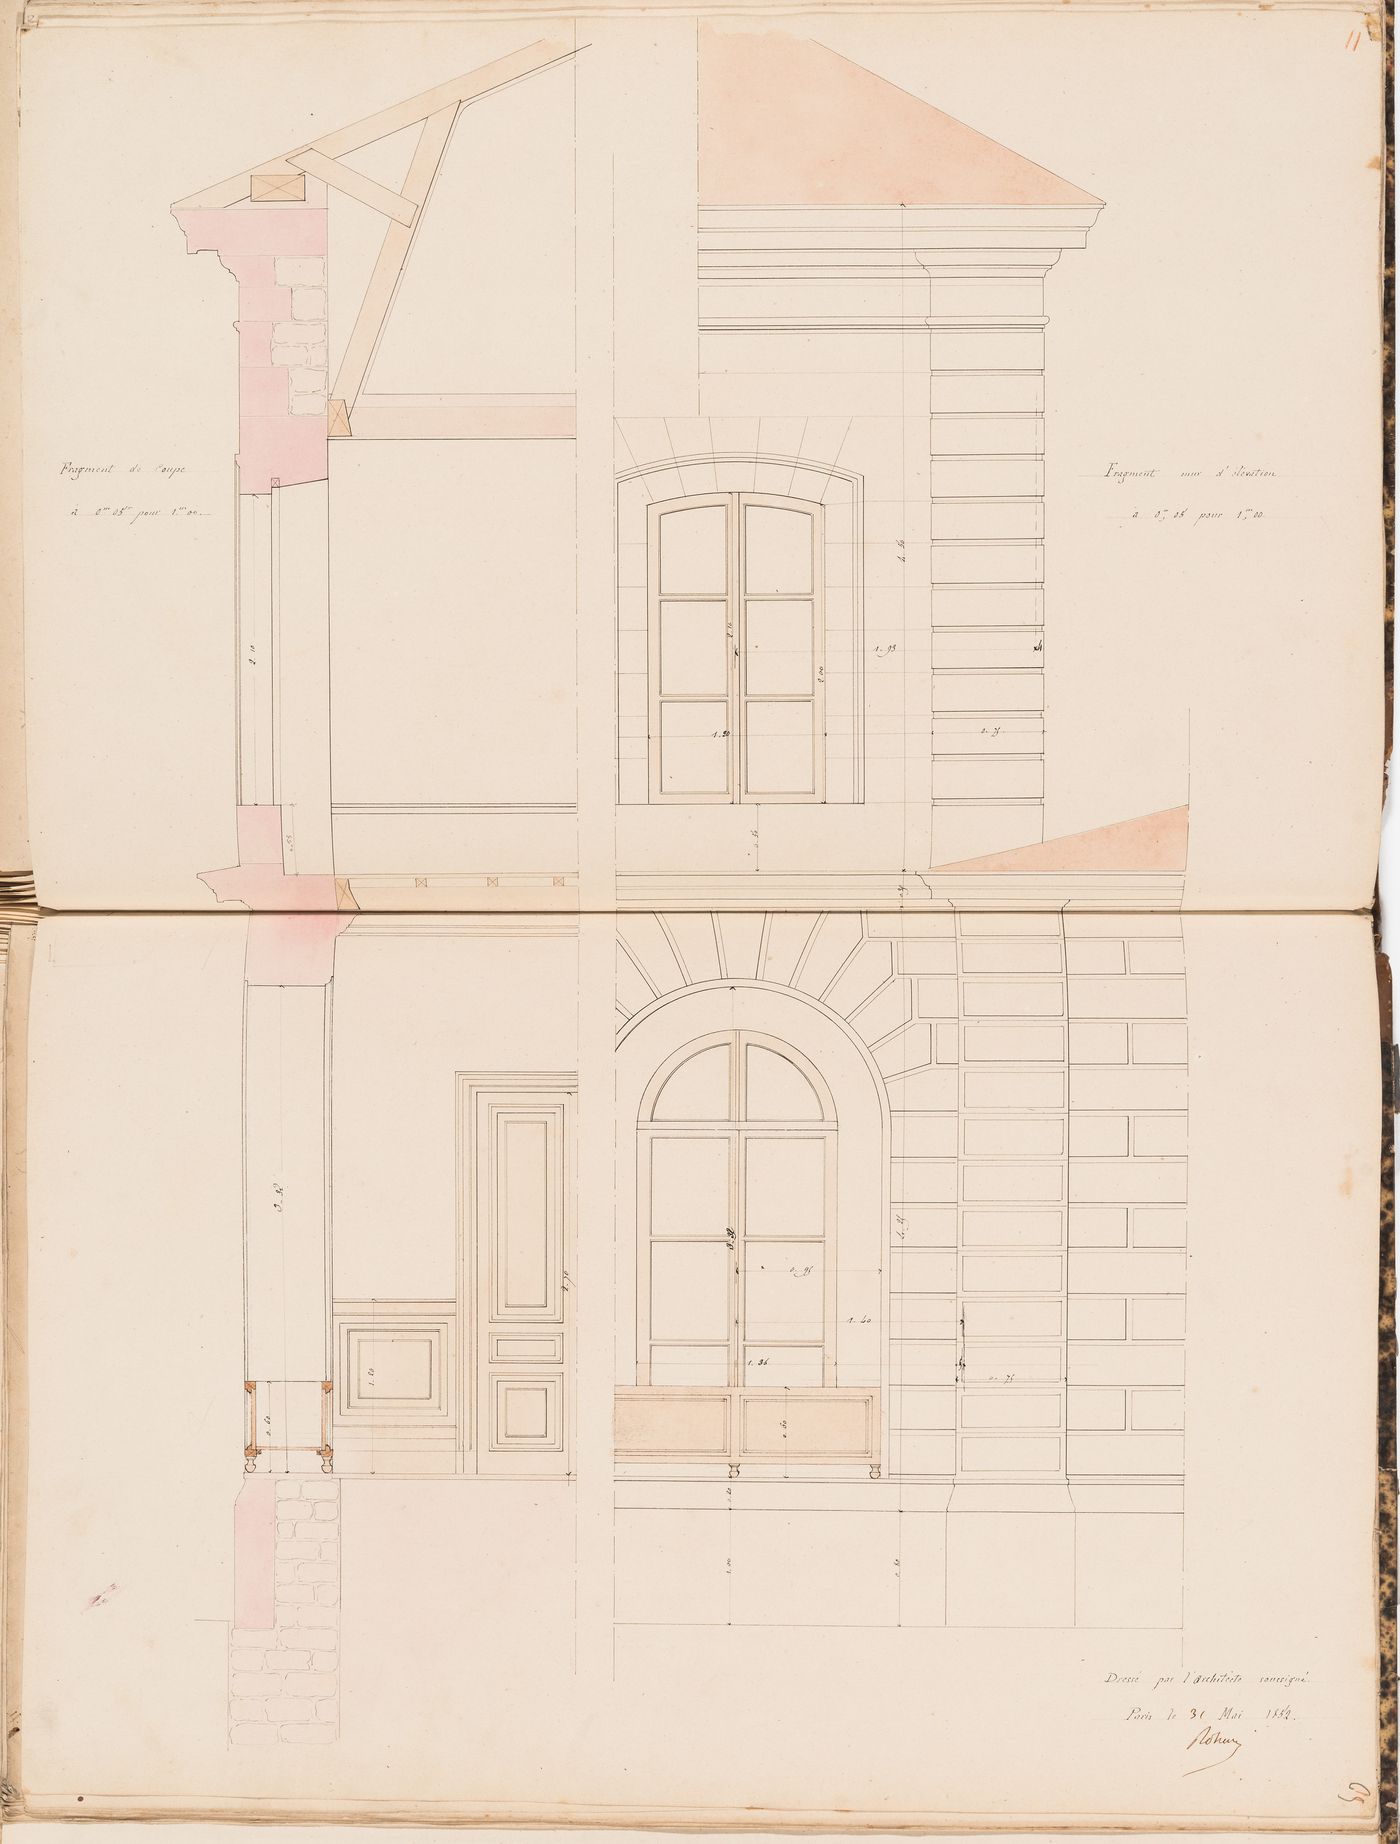 Partial section and partial elevation for a country house for Madame de Lescure, Royan